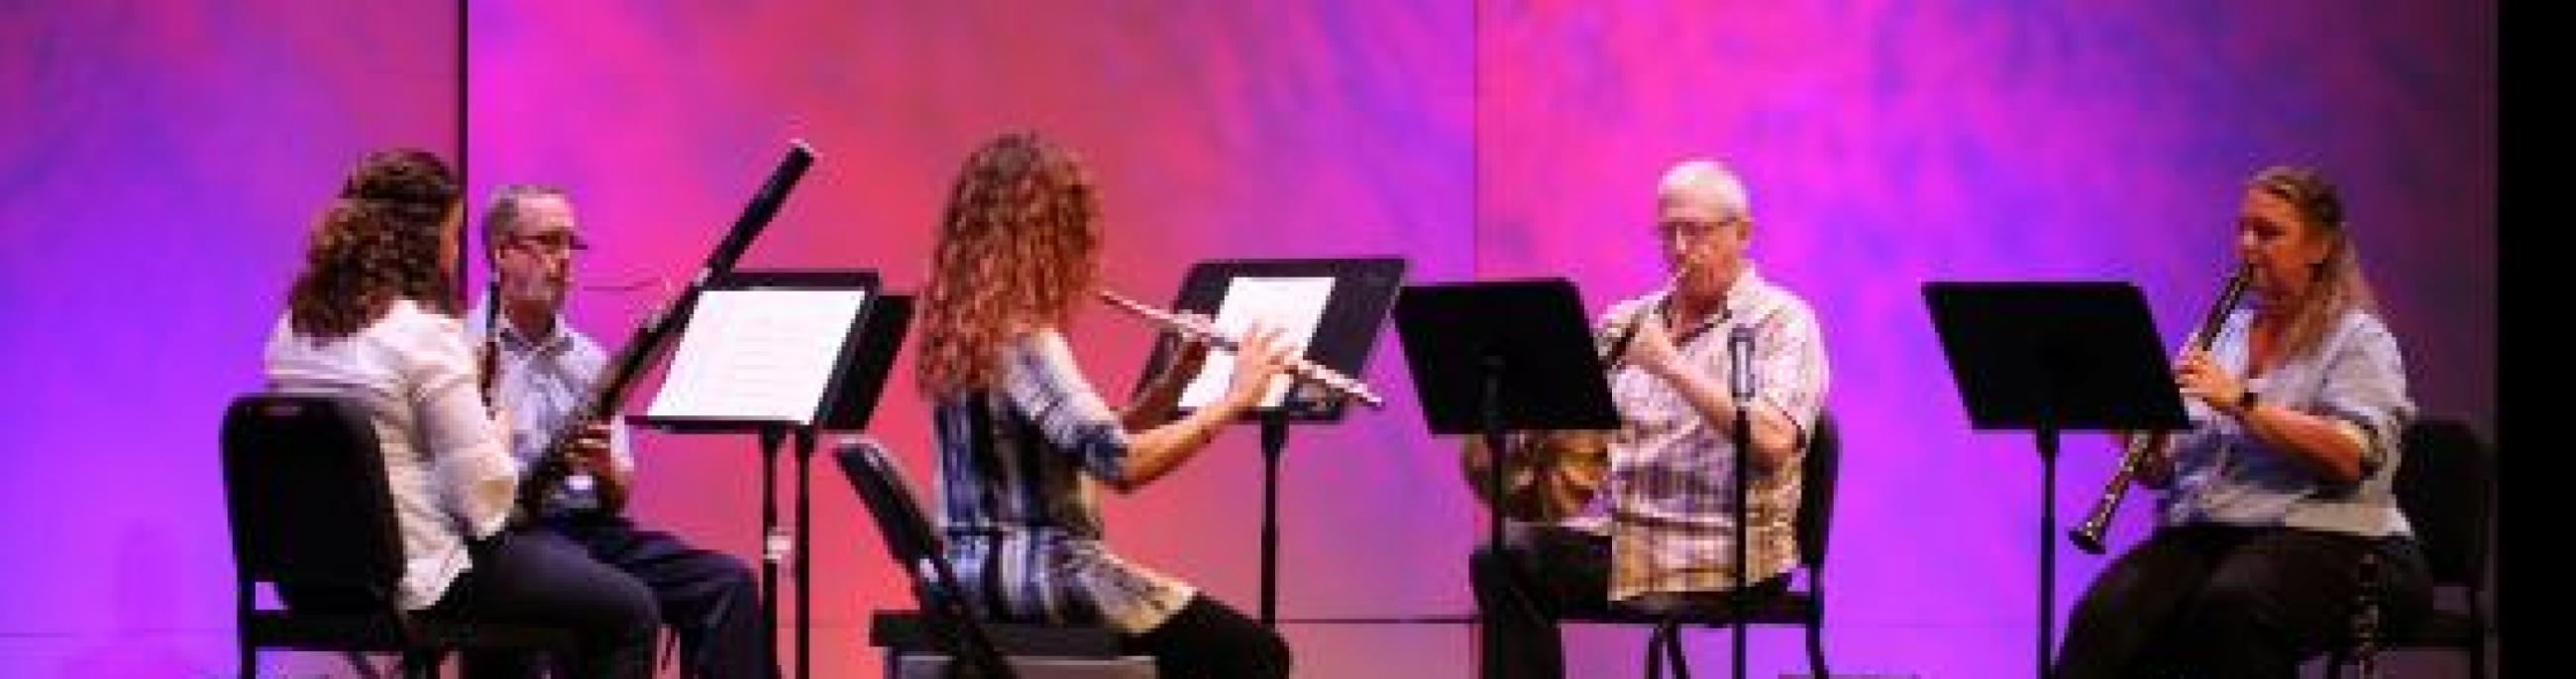 A wind quintet performs in front of a pink and purple backdrop.